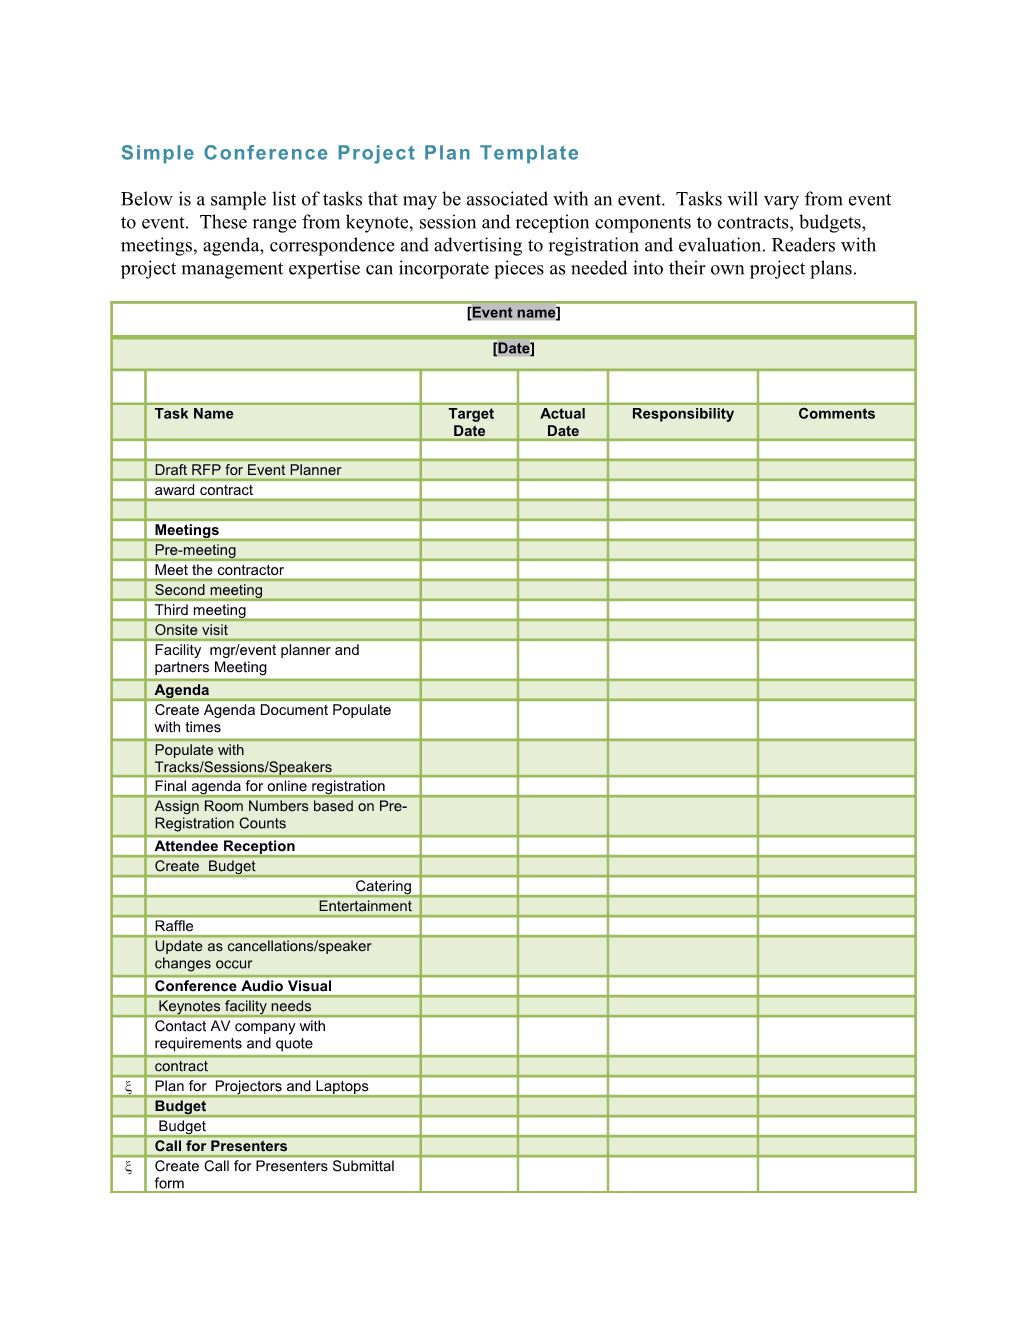 Simple Conference Project Plan Template